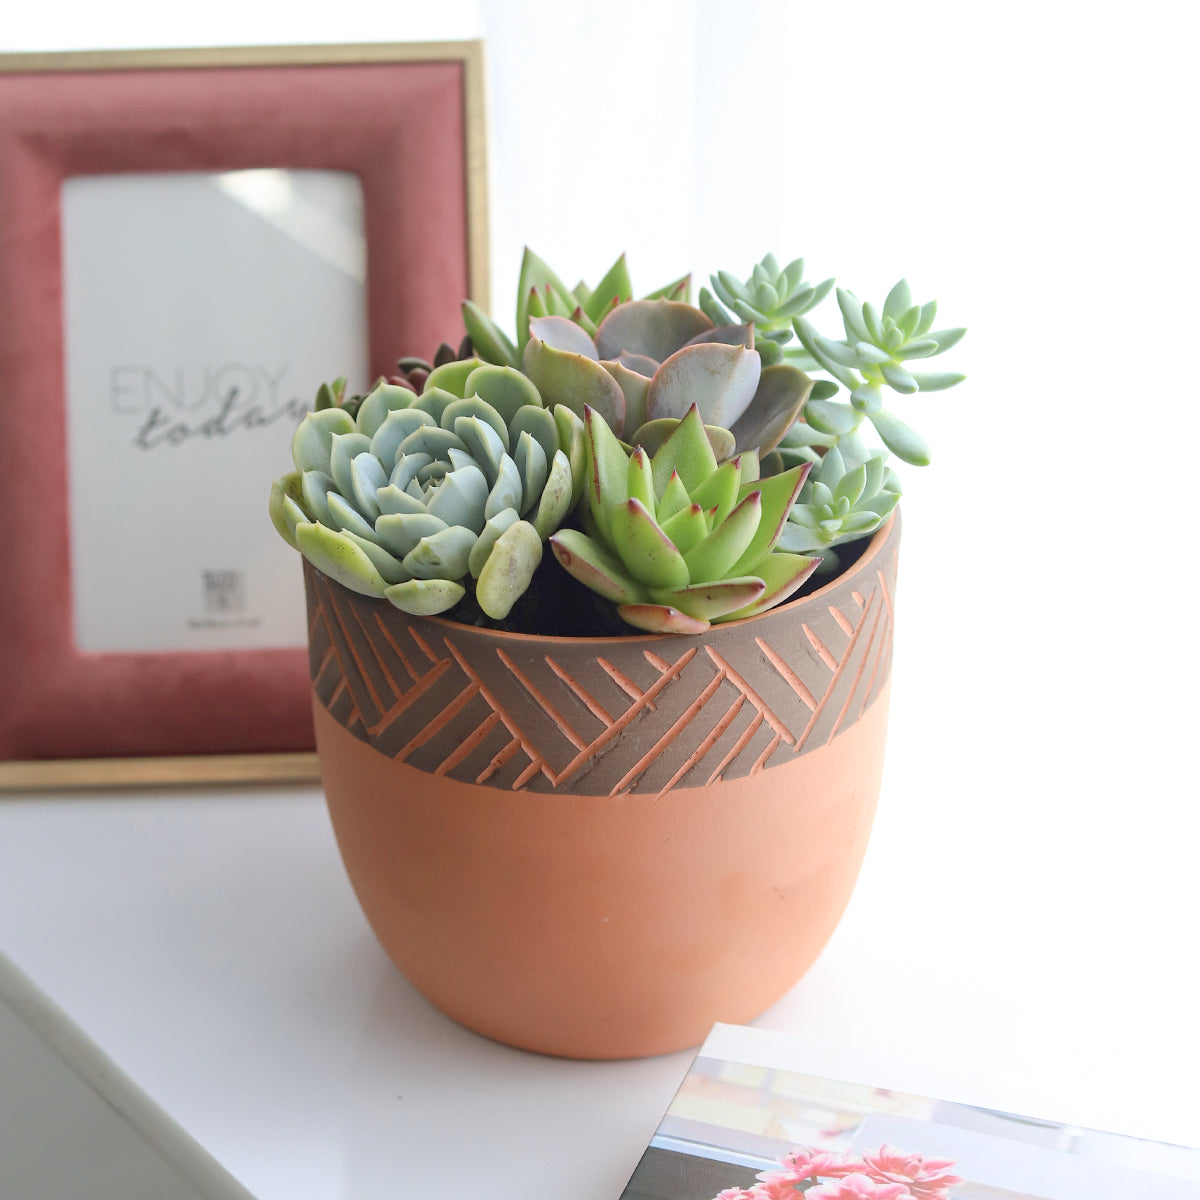 rosette succulents, colorful succulents, stunning succulent arrangement for home and office decor, succulent arrangement